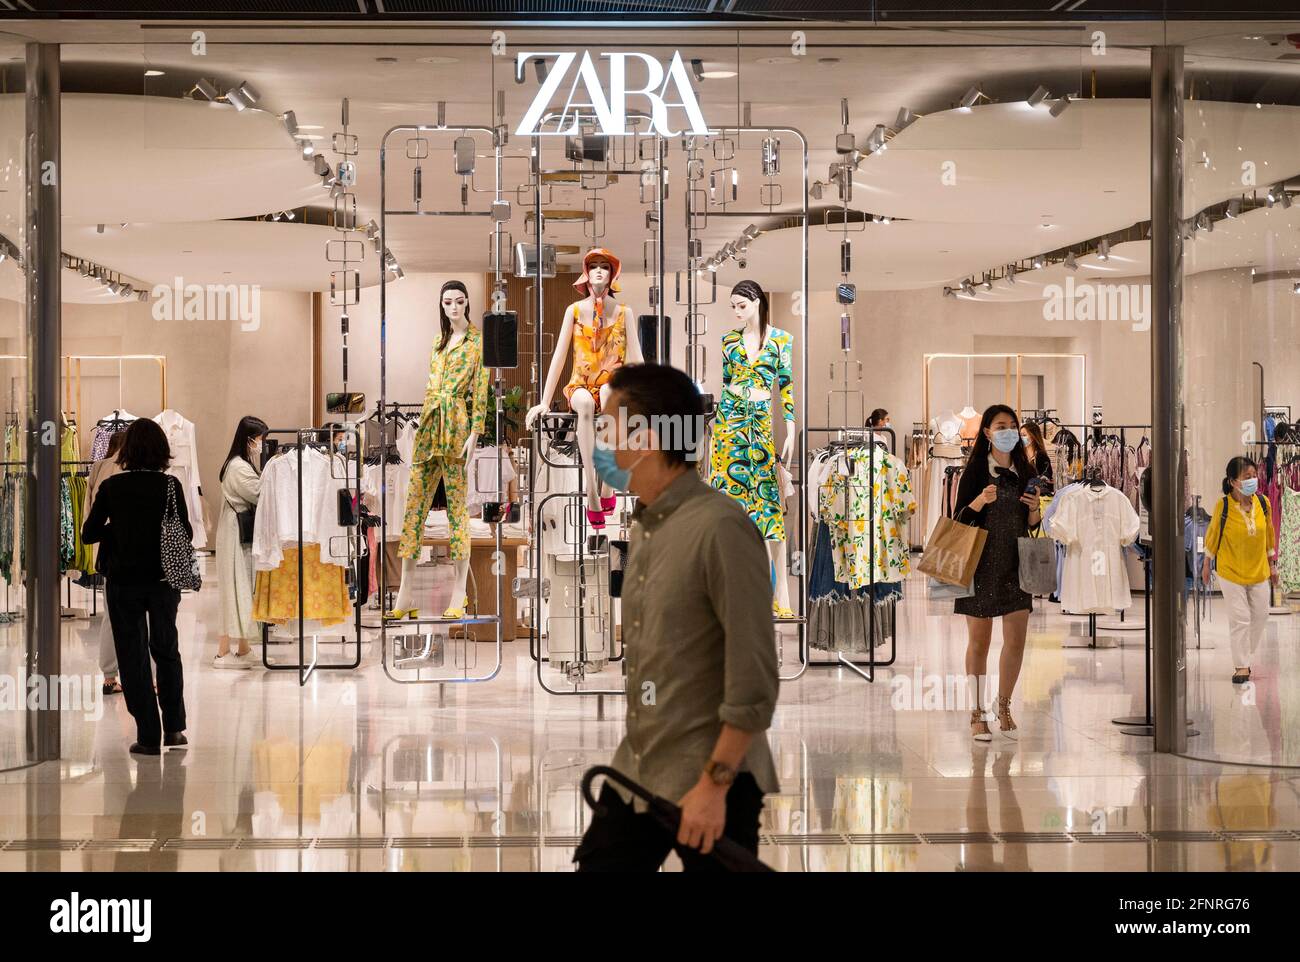 Zara Store Usa High Resolution Stock Photography and Images - Alamy